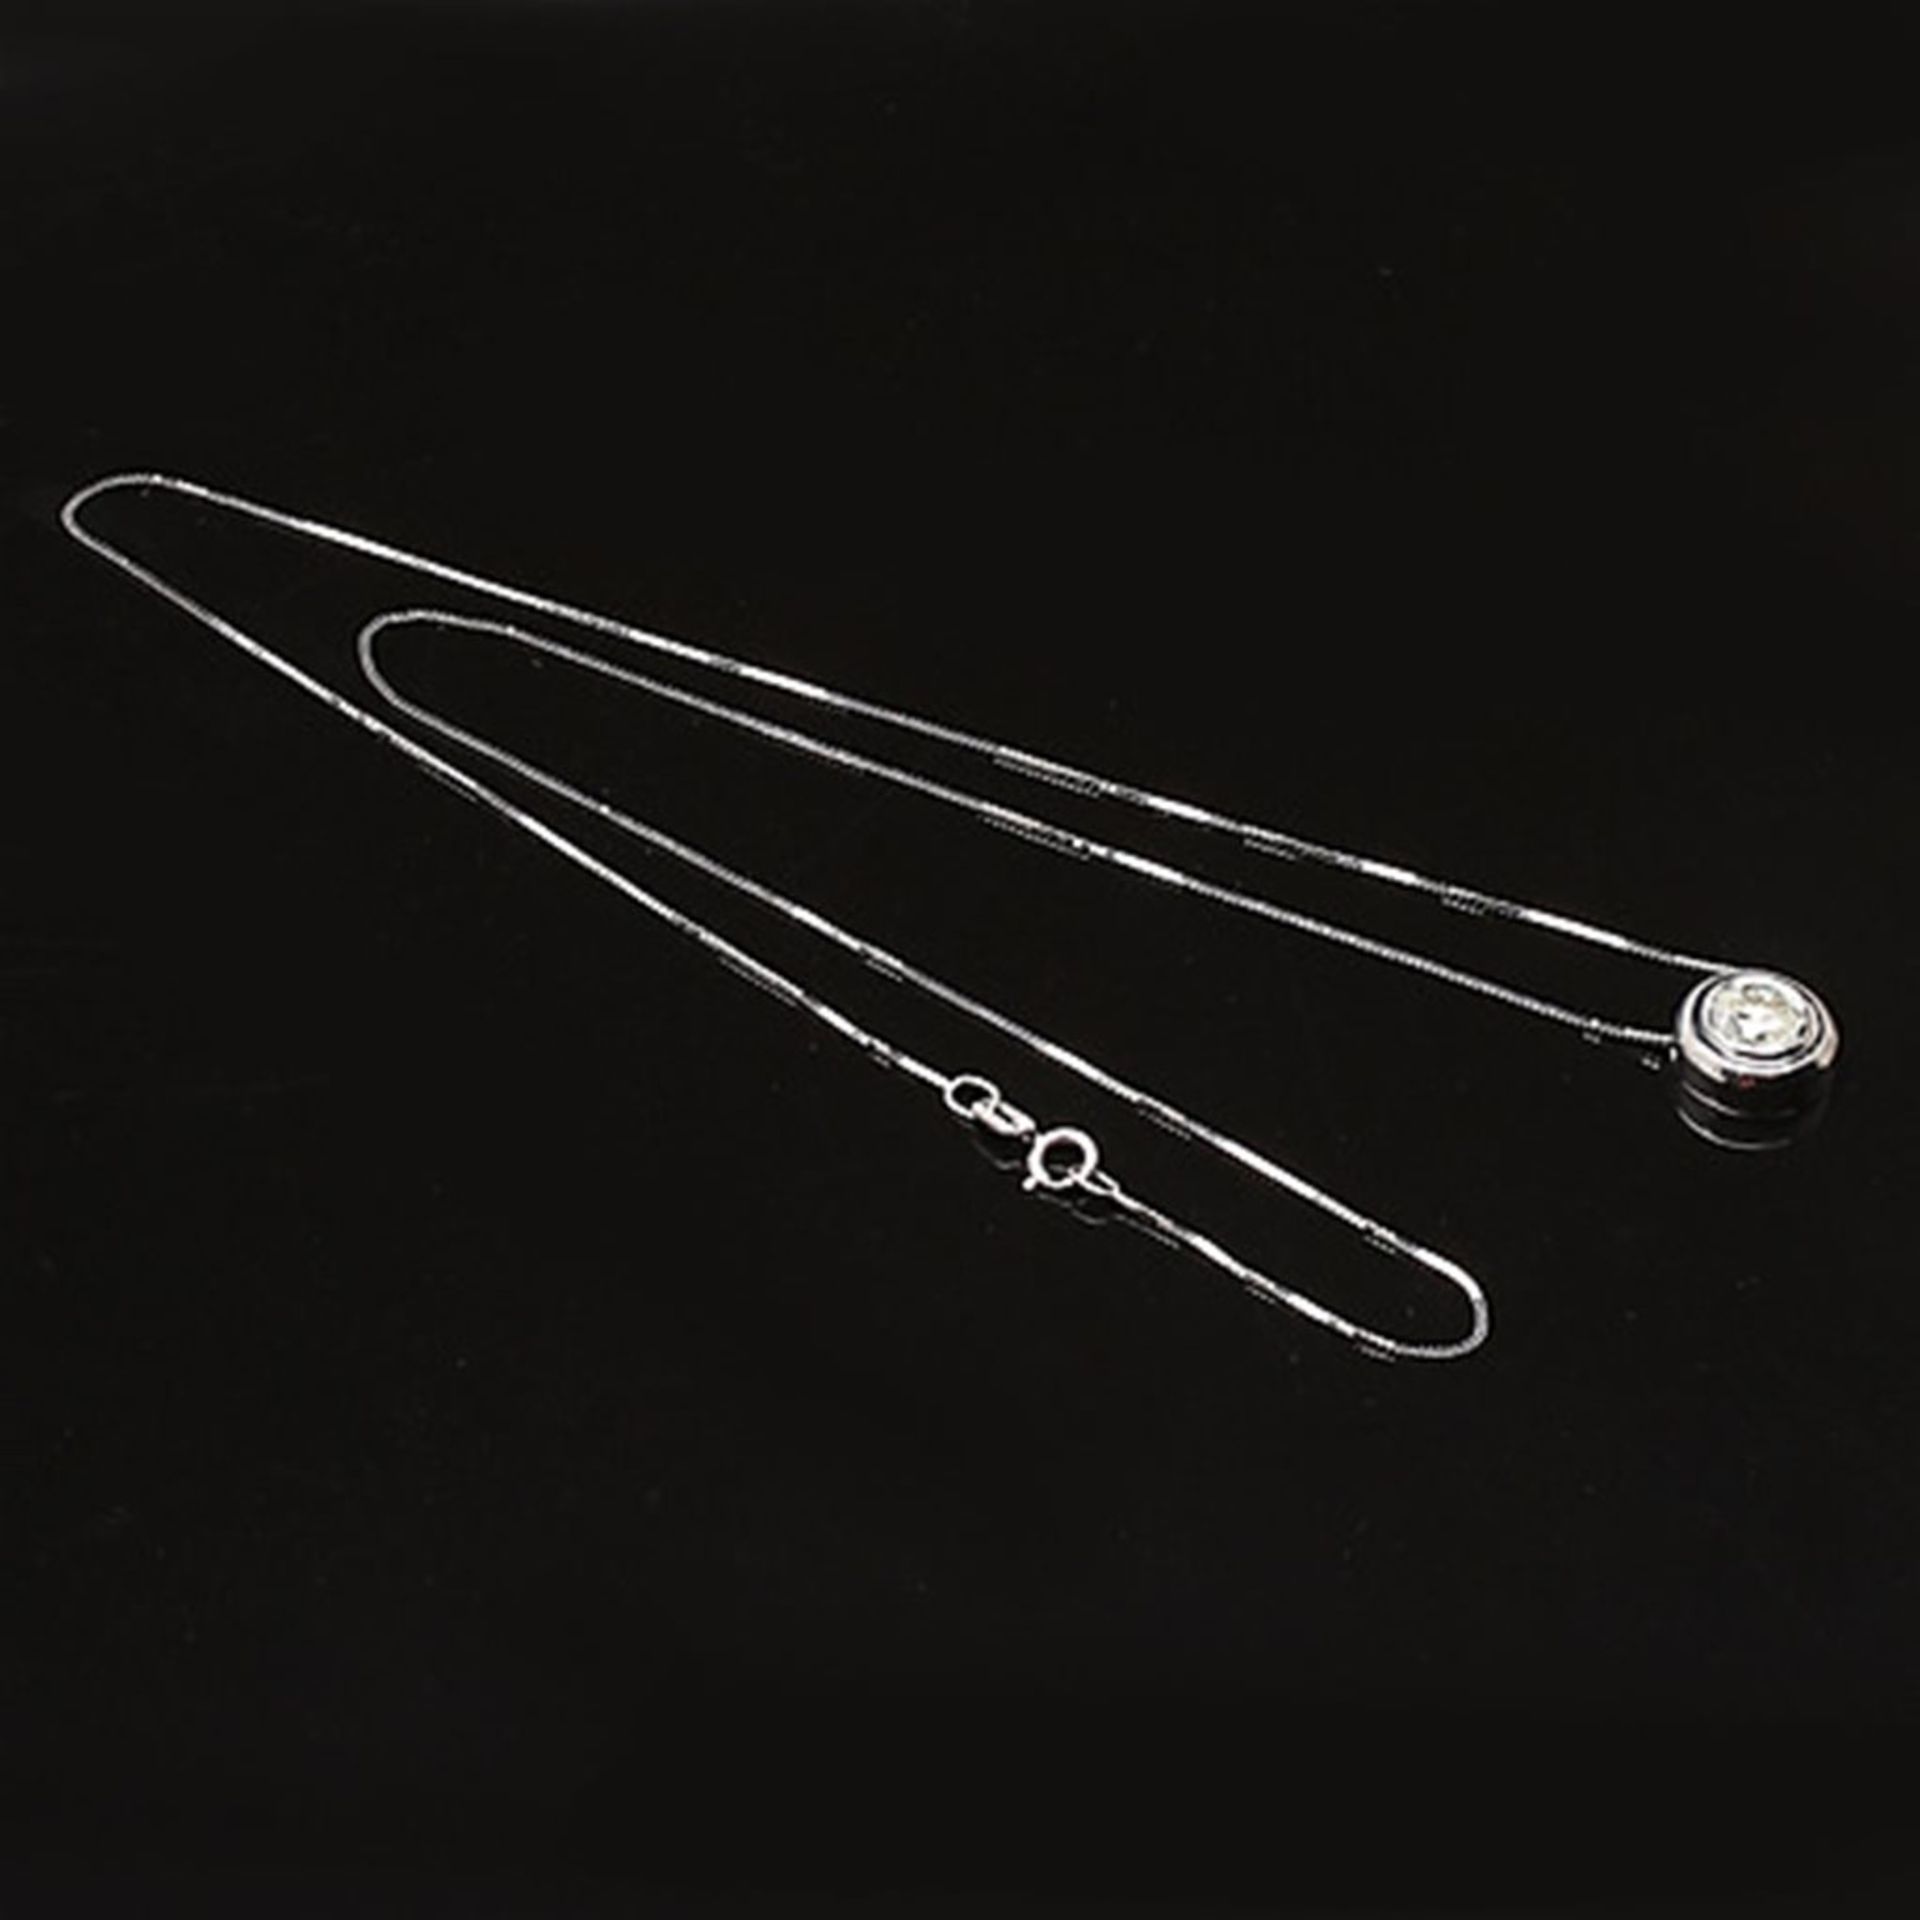 Necklace with pendant in white gold, with 0.70 ct. diamonds - Image 2 of 2